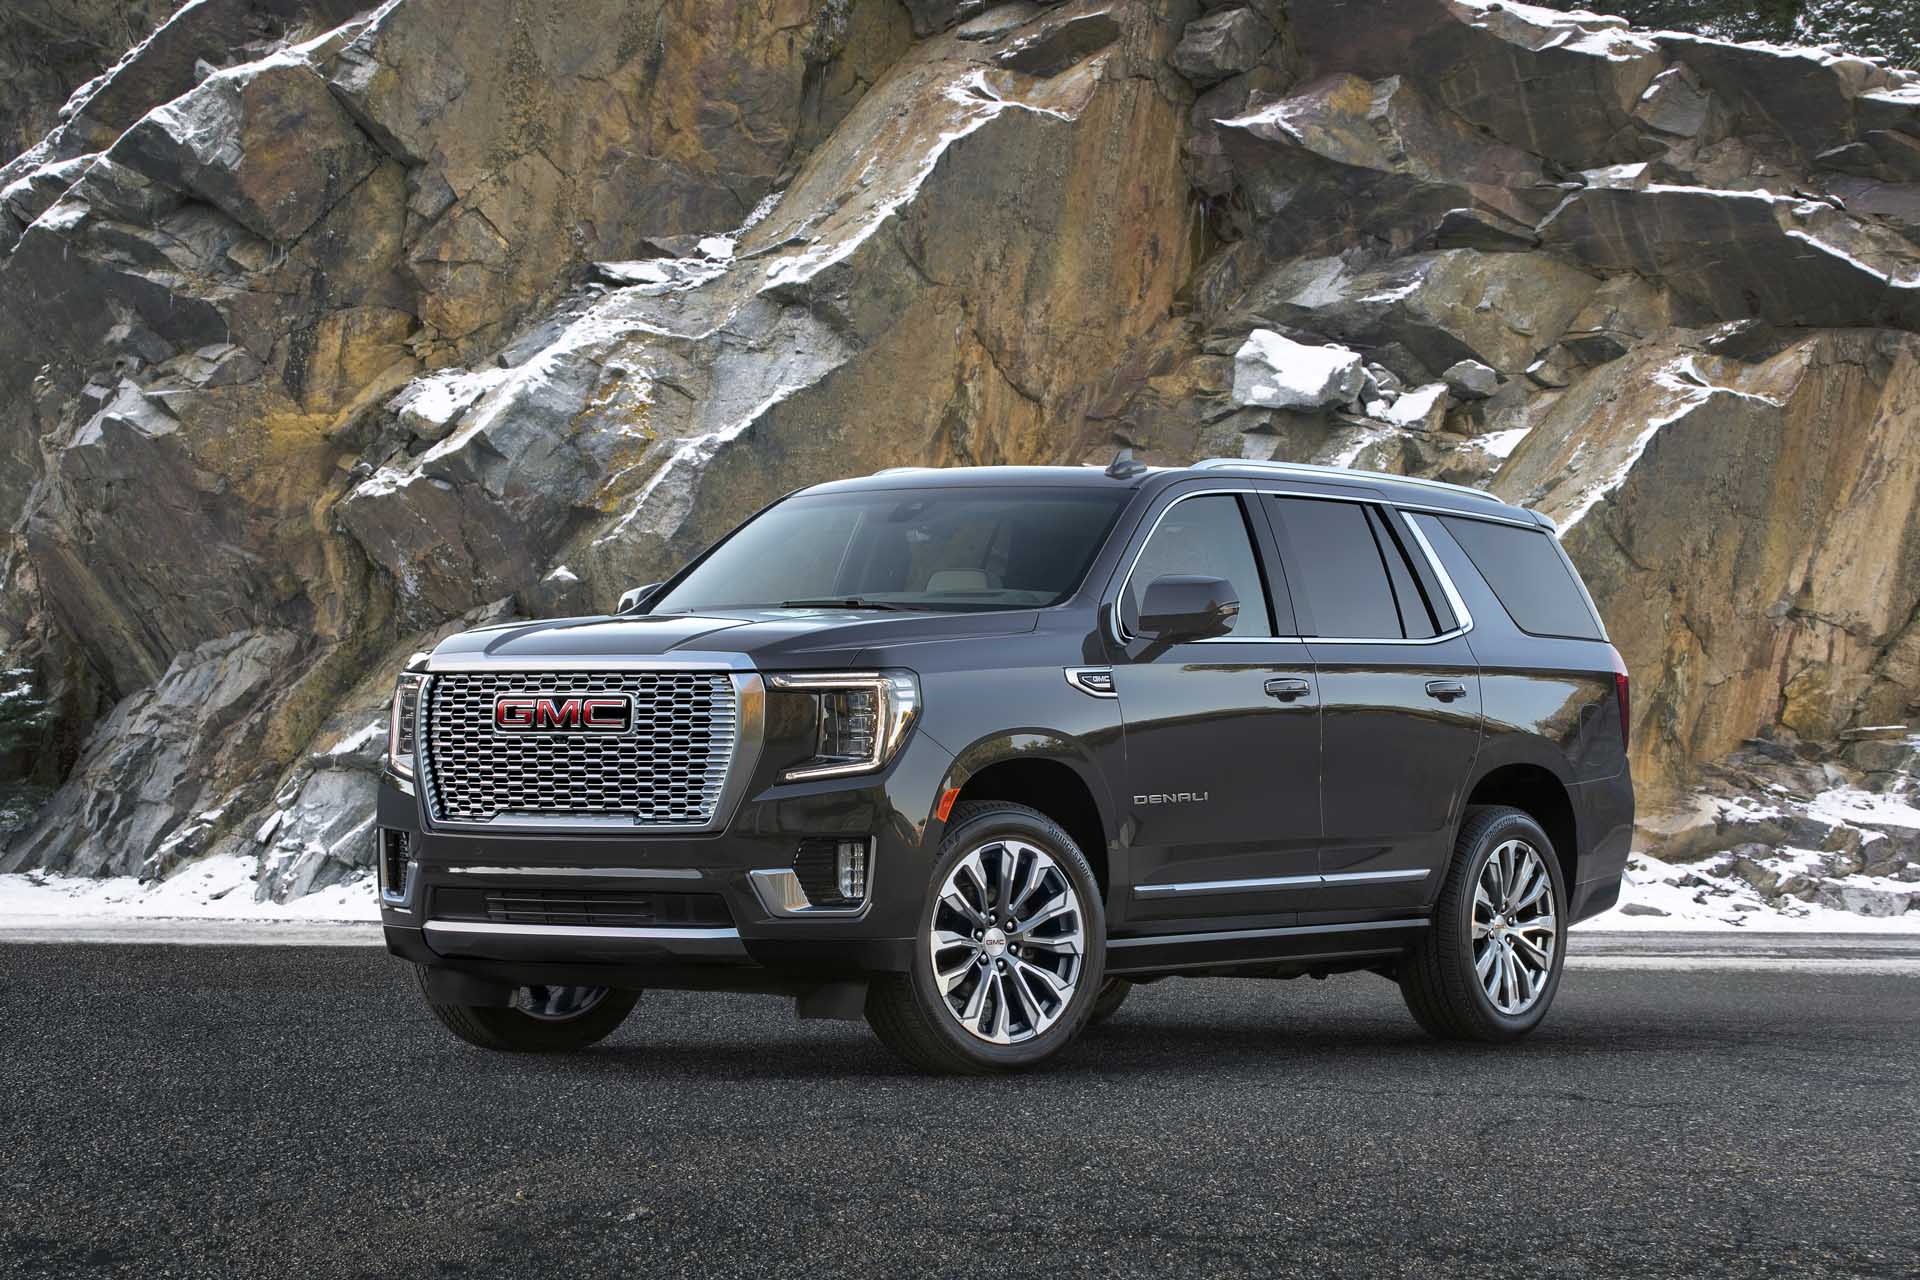 GMC Black Friday 2022 Ads, Sales & Deals – What to Expect